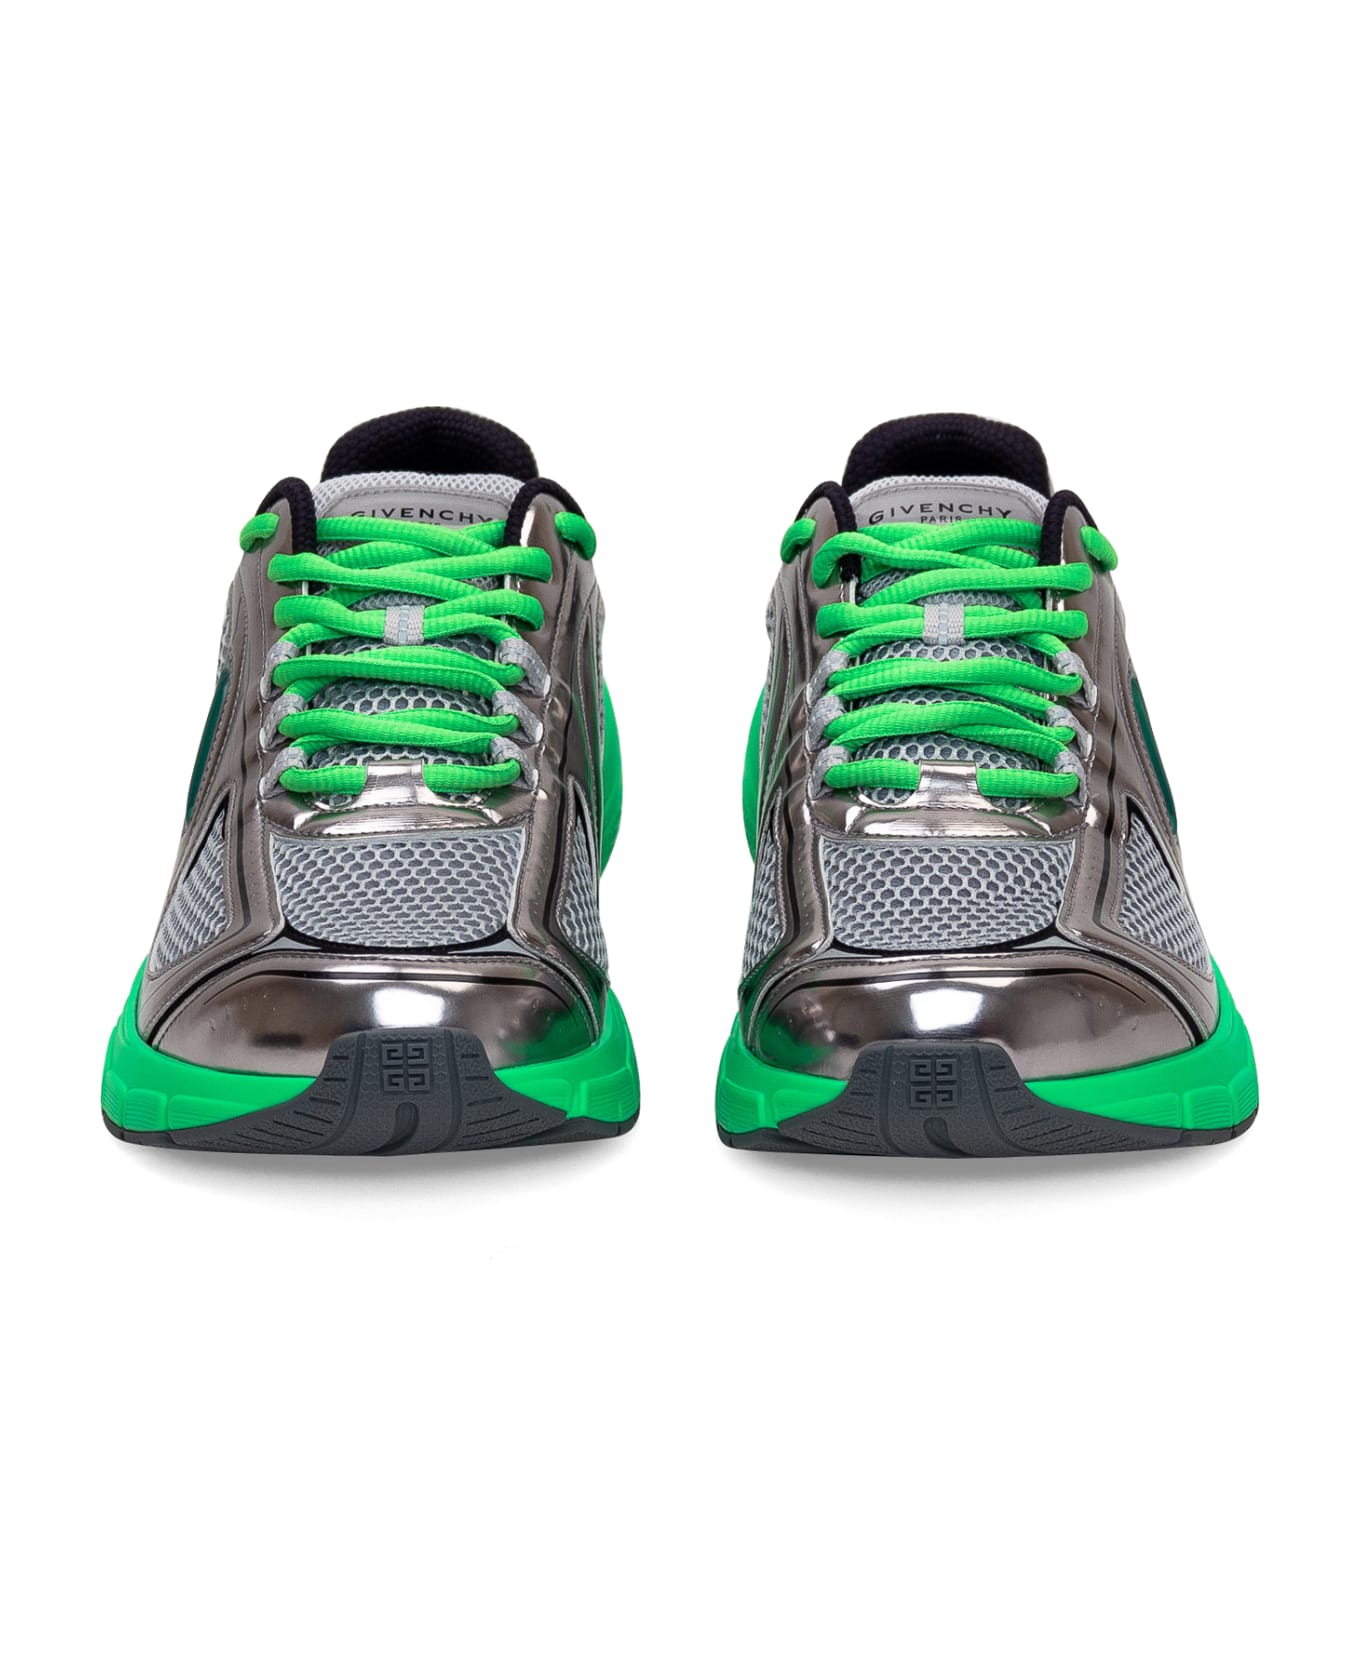 Givenchy Green And Silver Tk-mx Runner Sneakers - Verde